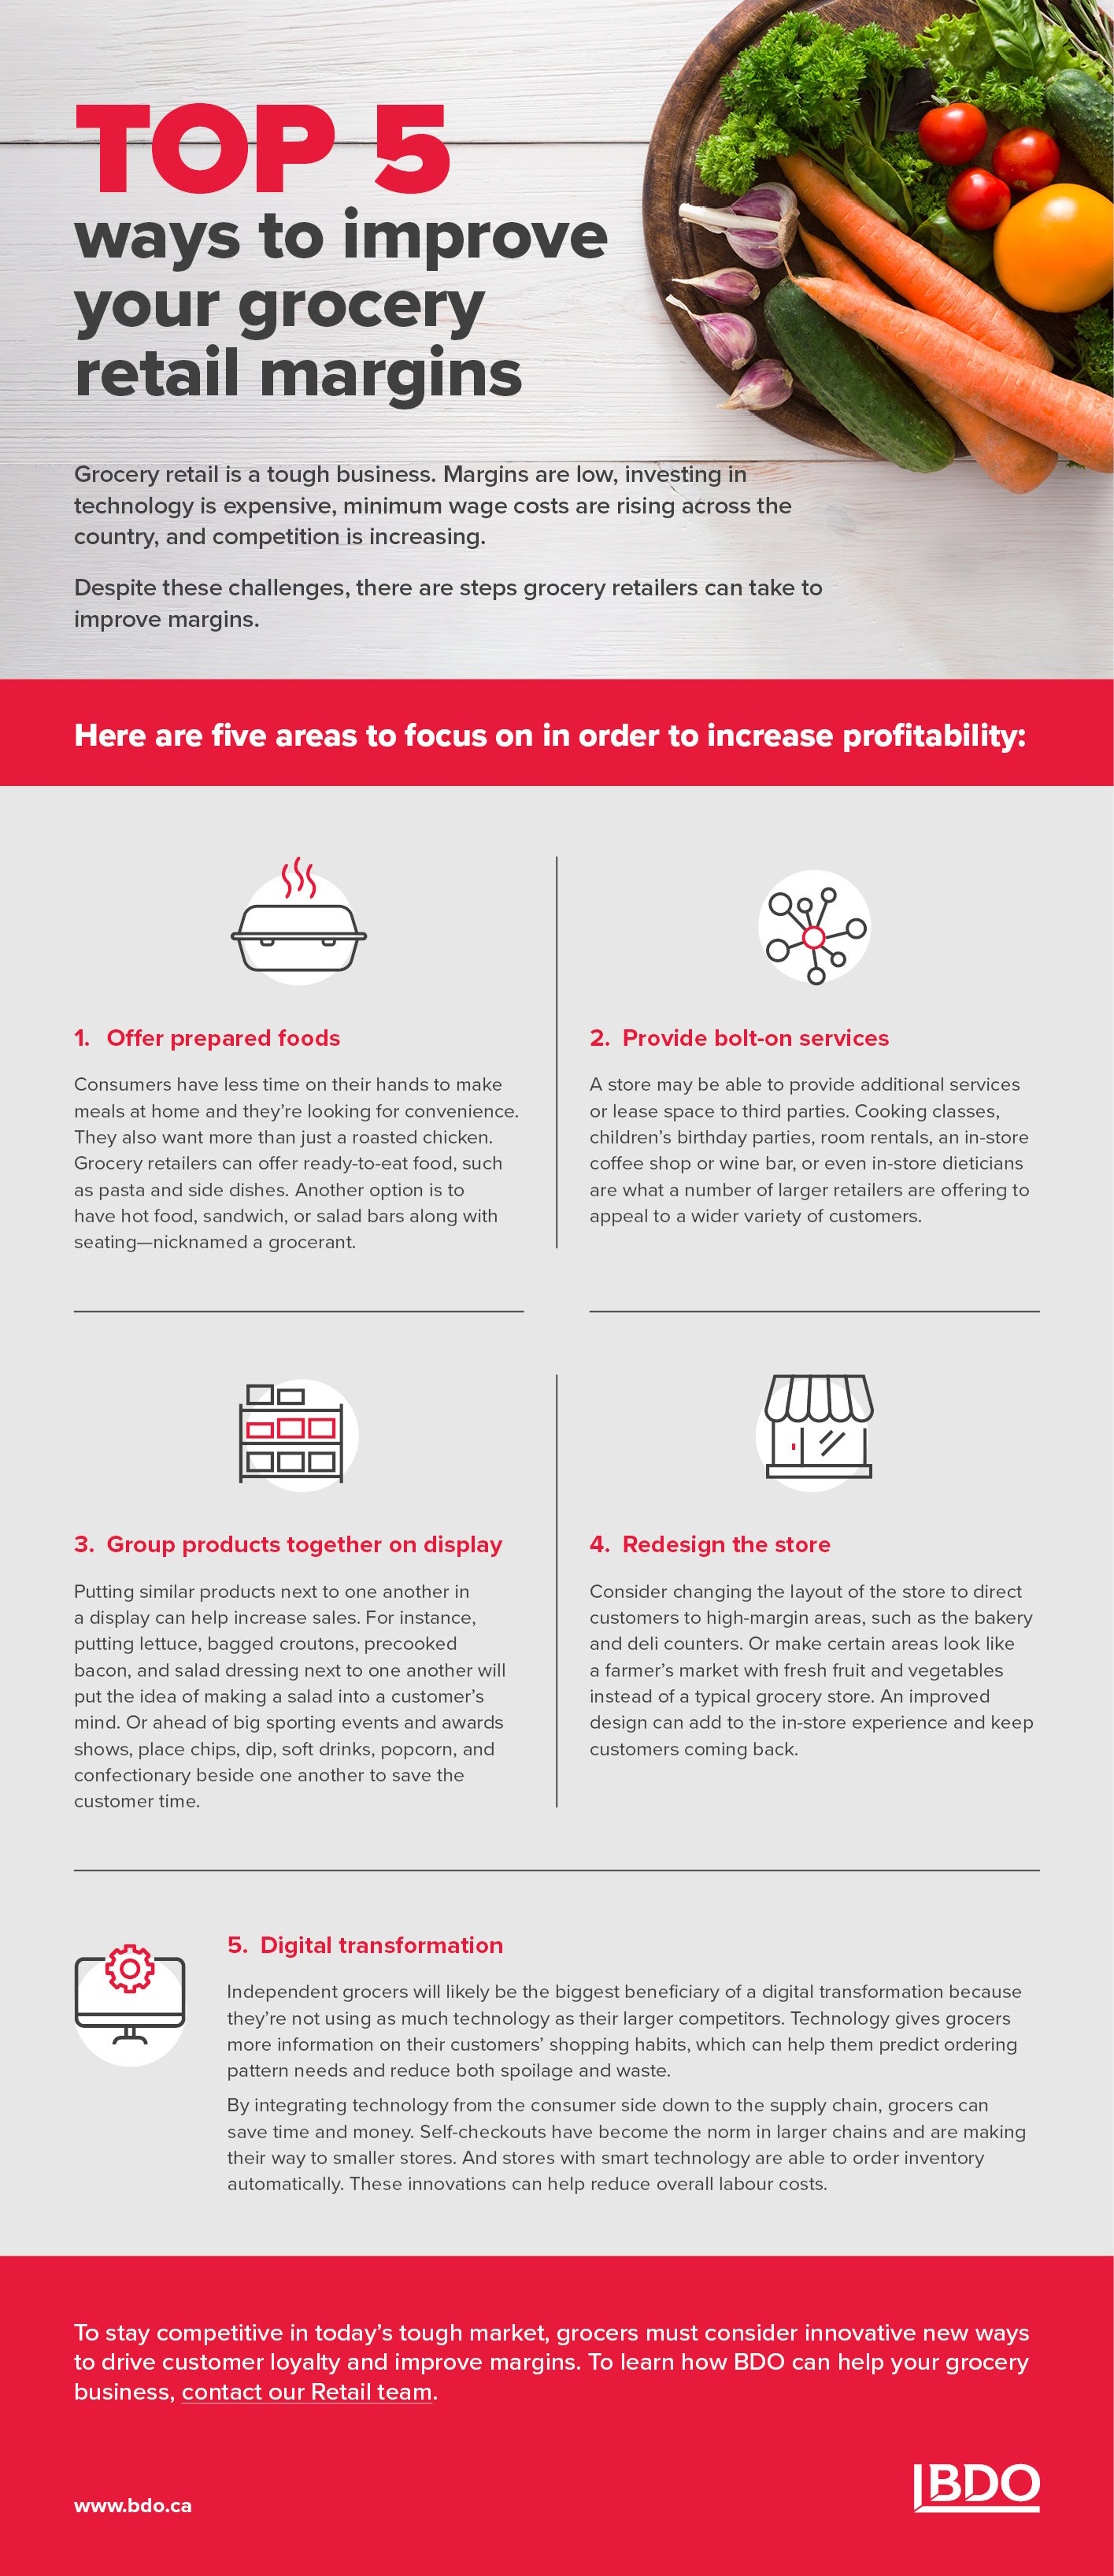 An infographic details five ways grocery retailers can improve margins, which include offering prepared foods, providing bolt-on services, grouping similar products in a display, redesigning the store, and leveraging technology.